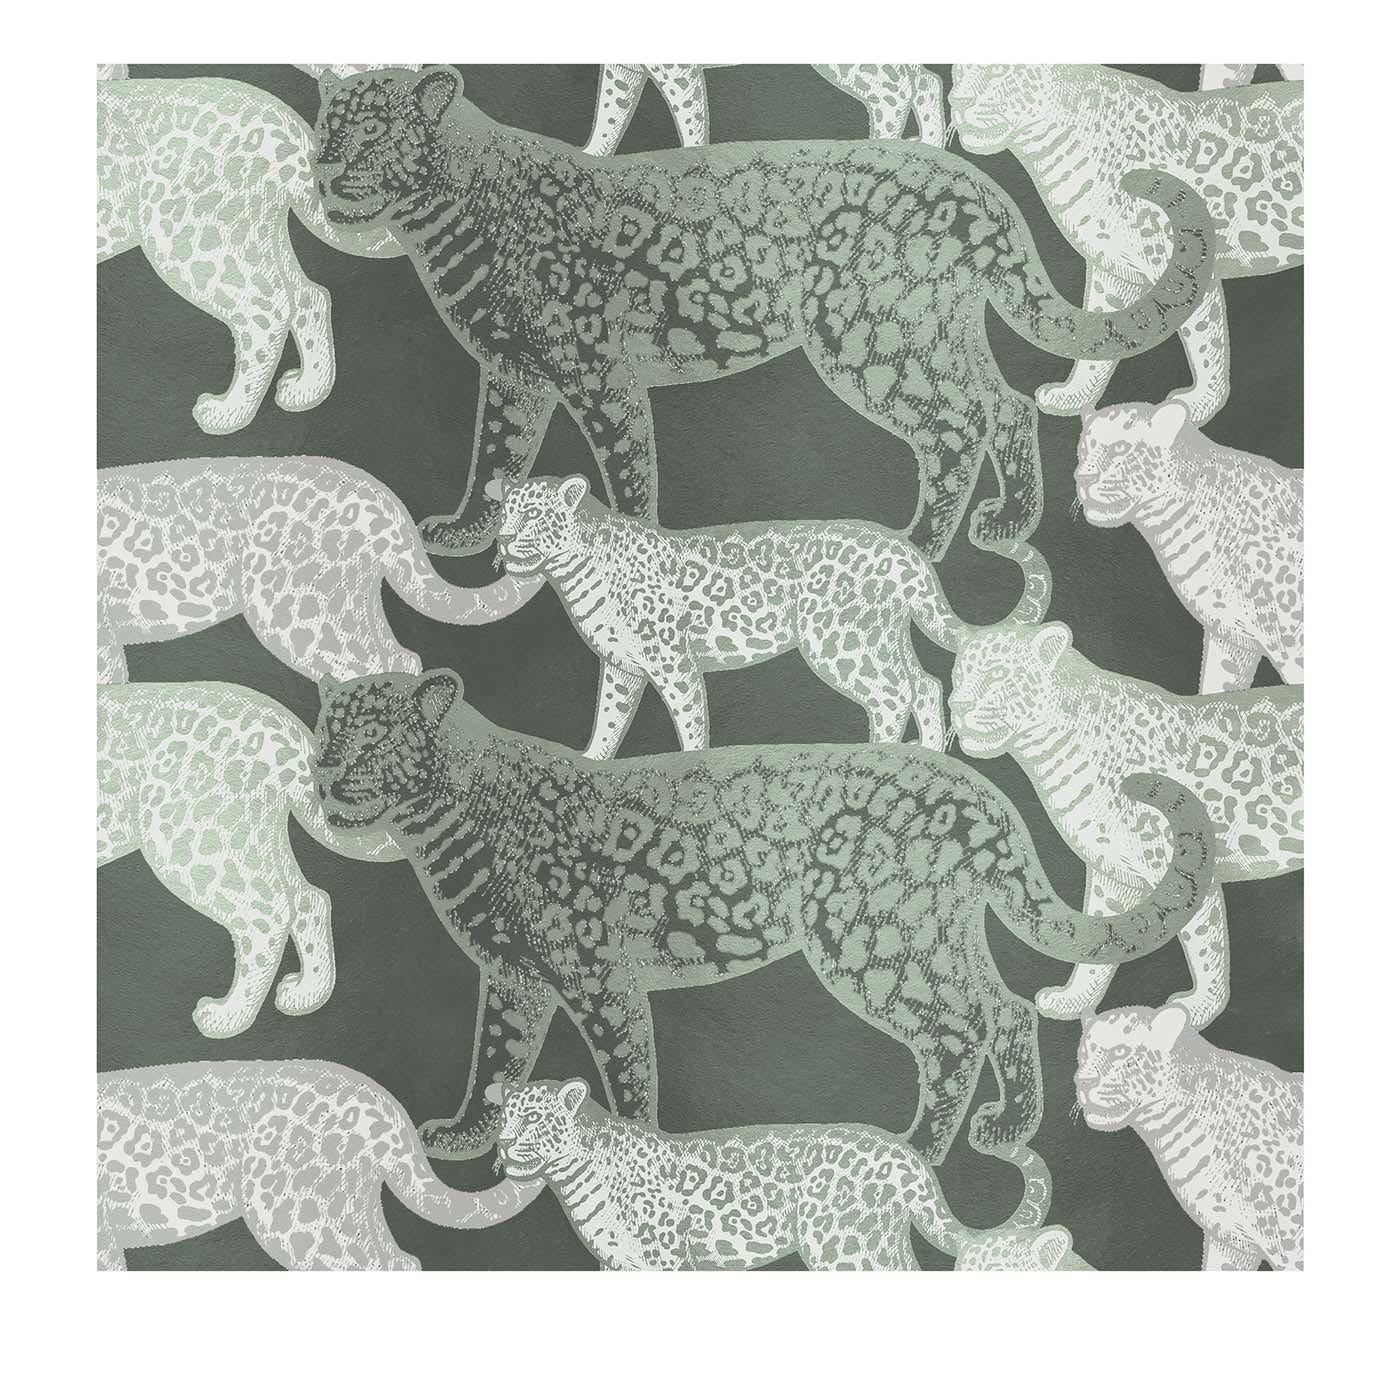 Walking Leopards Green Panel #2 For Sale at 1stDibs